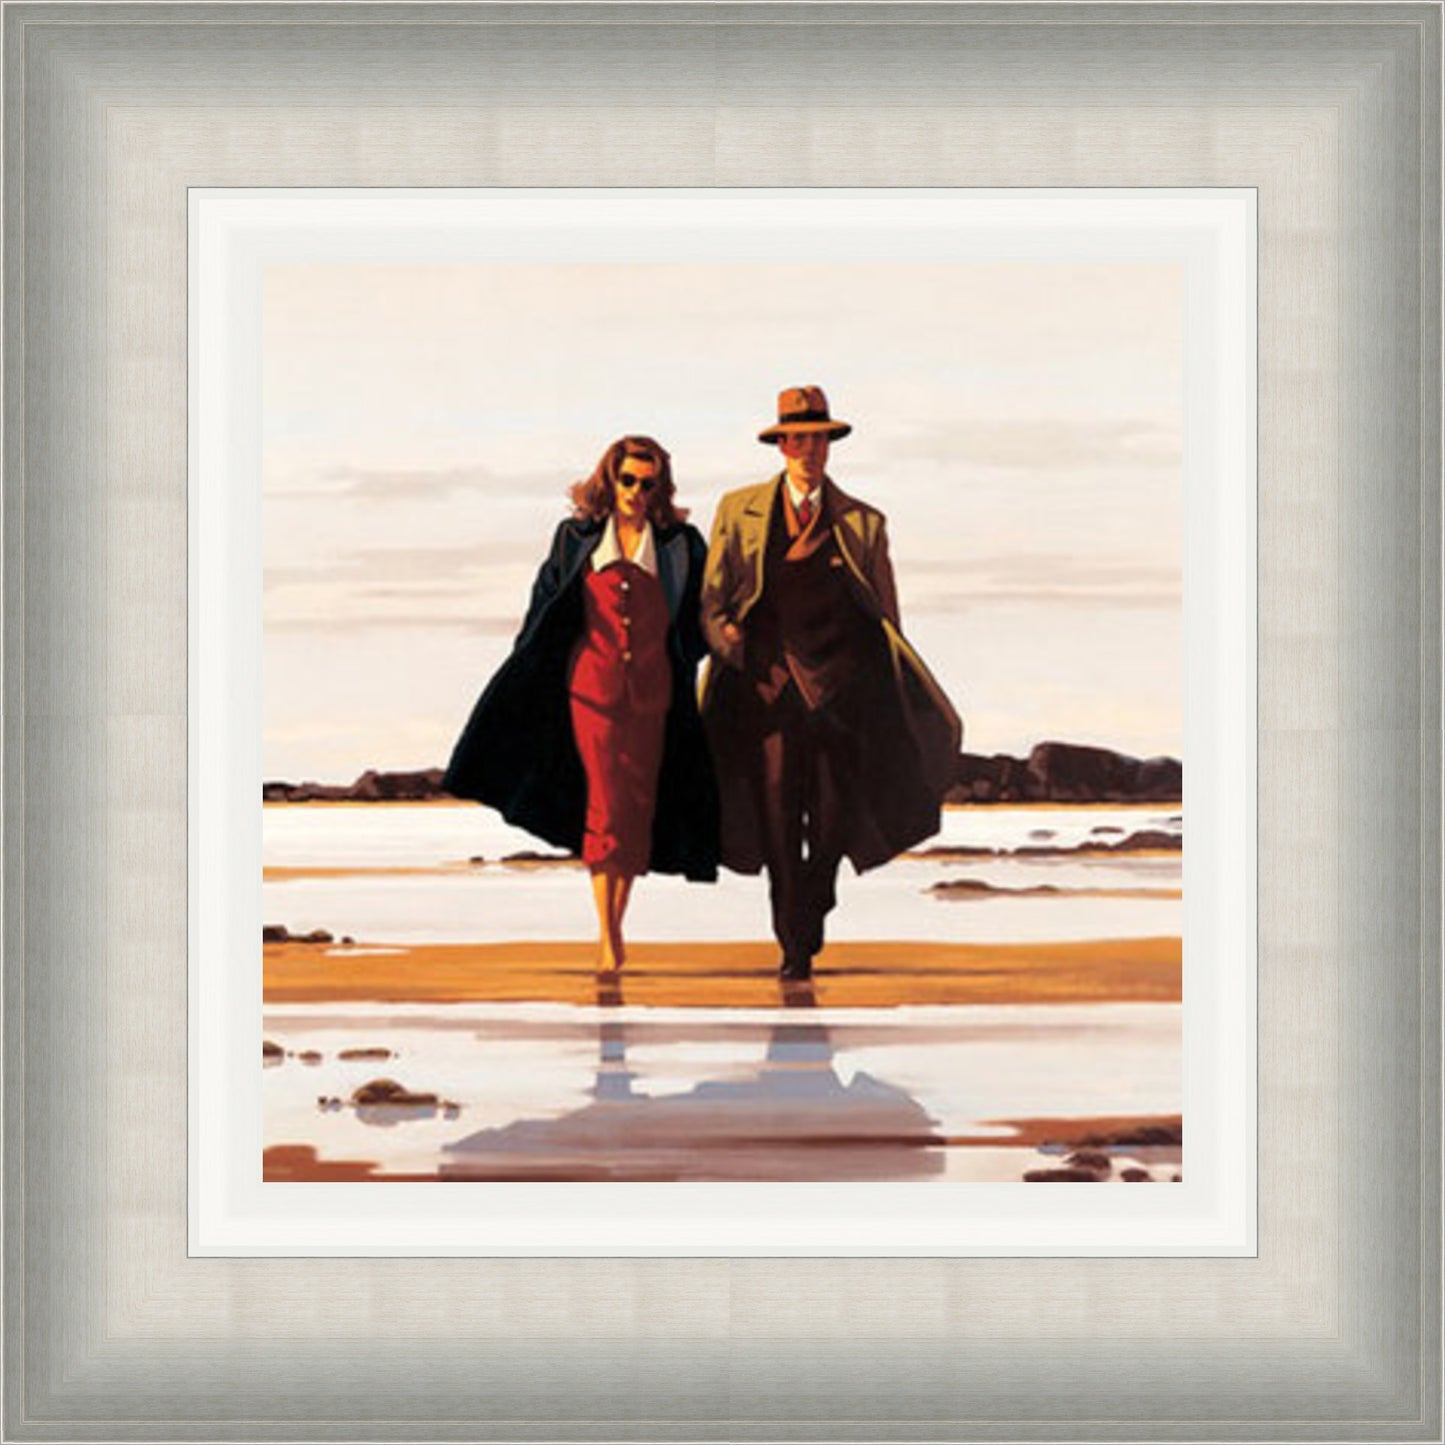 The Road to Nowhere by Jack Vettriano